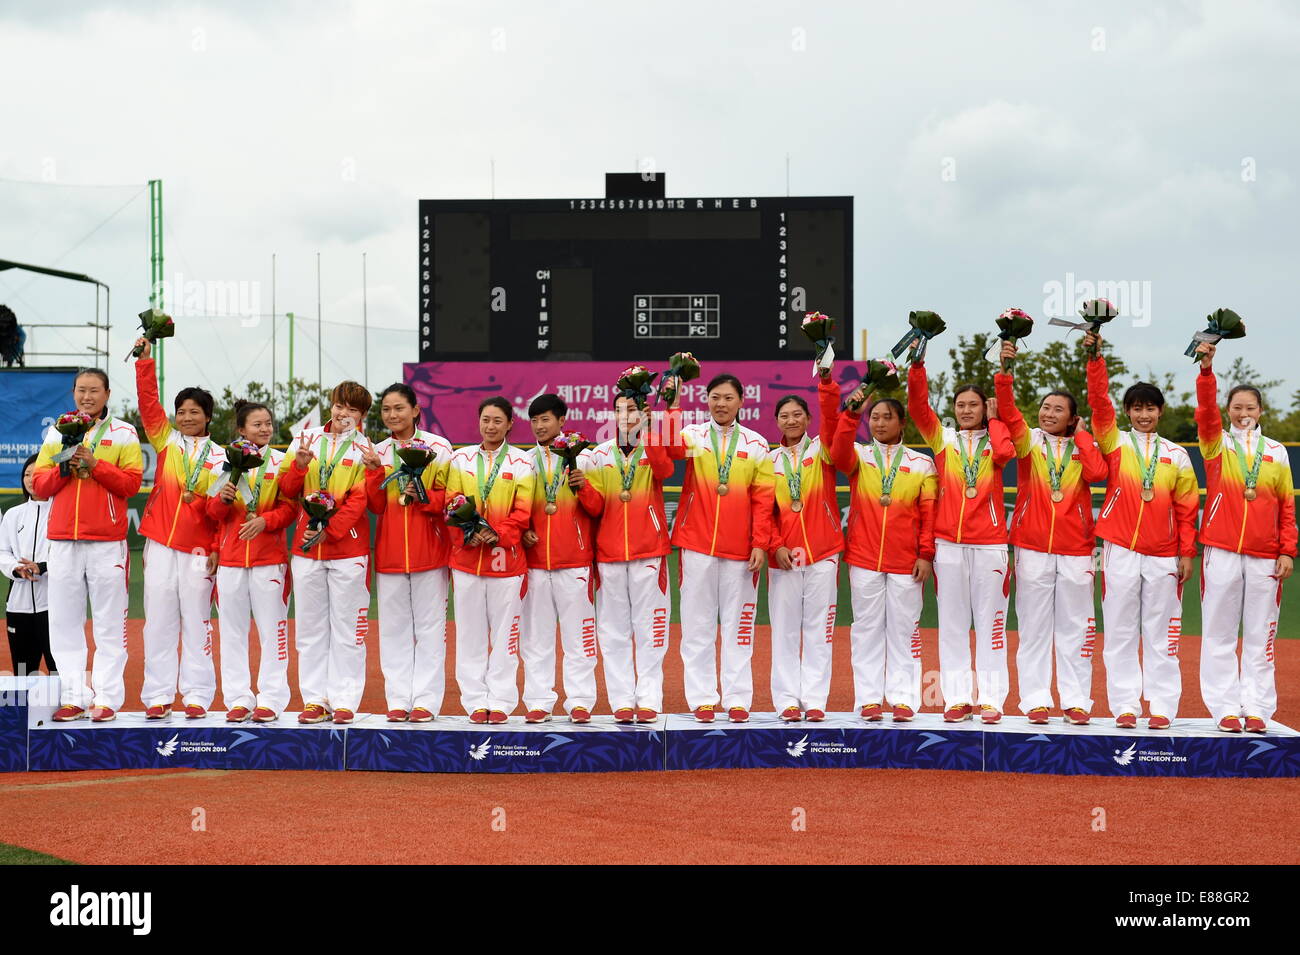 (141002) -- INCHEON, Oct. 2, 2014 (Xinhua) -- Bronze medalists players of China pose on the podium during awarding ceremony of the women's softball contest at the 17th Asian Games in Incheon, South Korea, Oct. 2, 2014. (Xinhua/Gao Jianjun)(mcg) Stock Photo